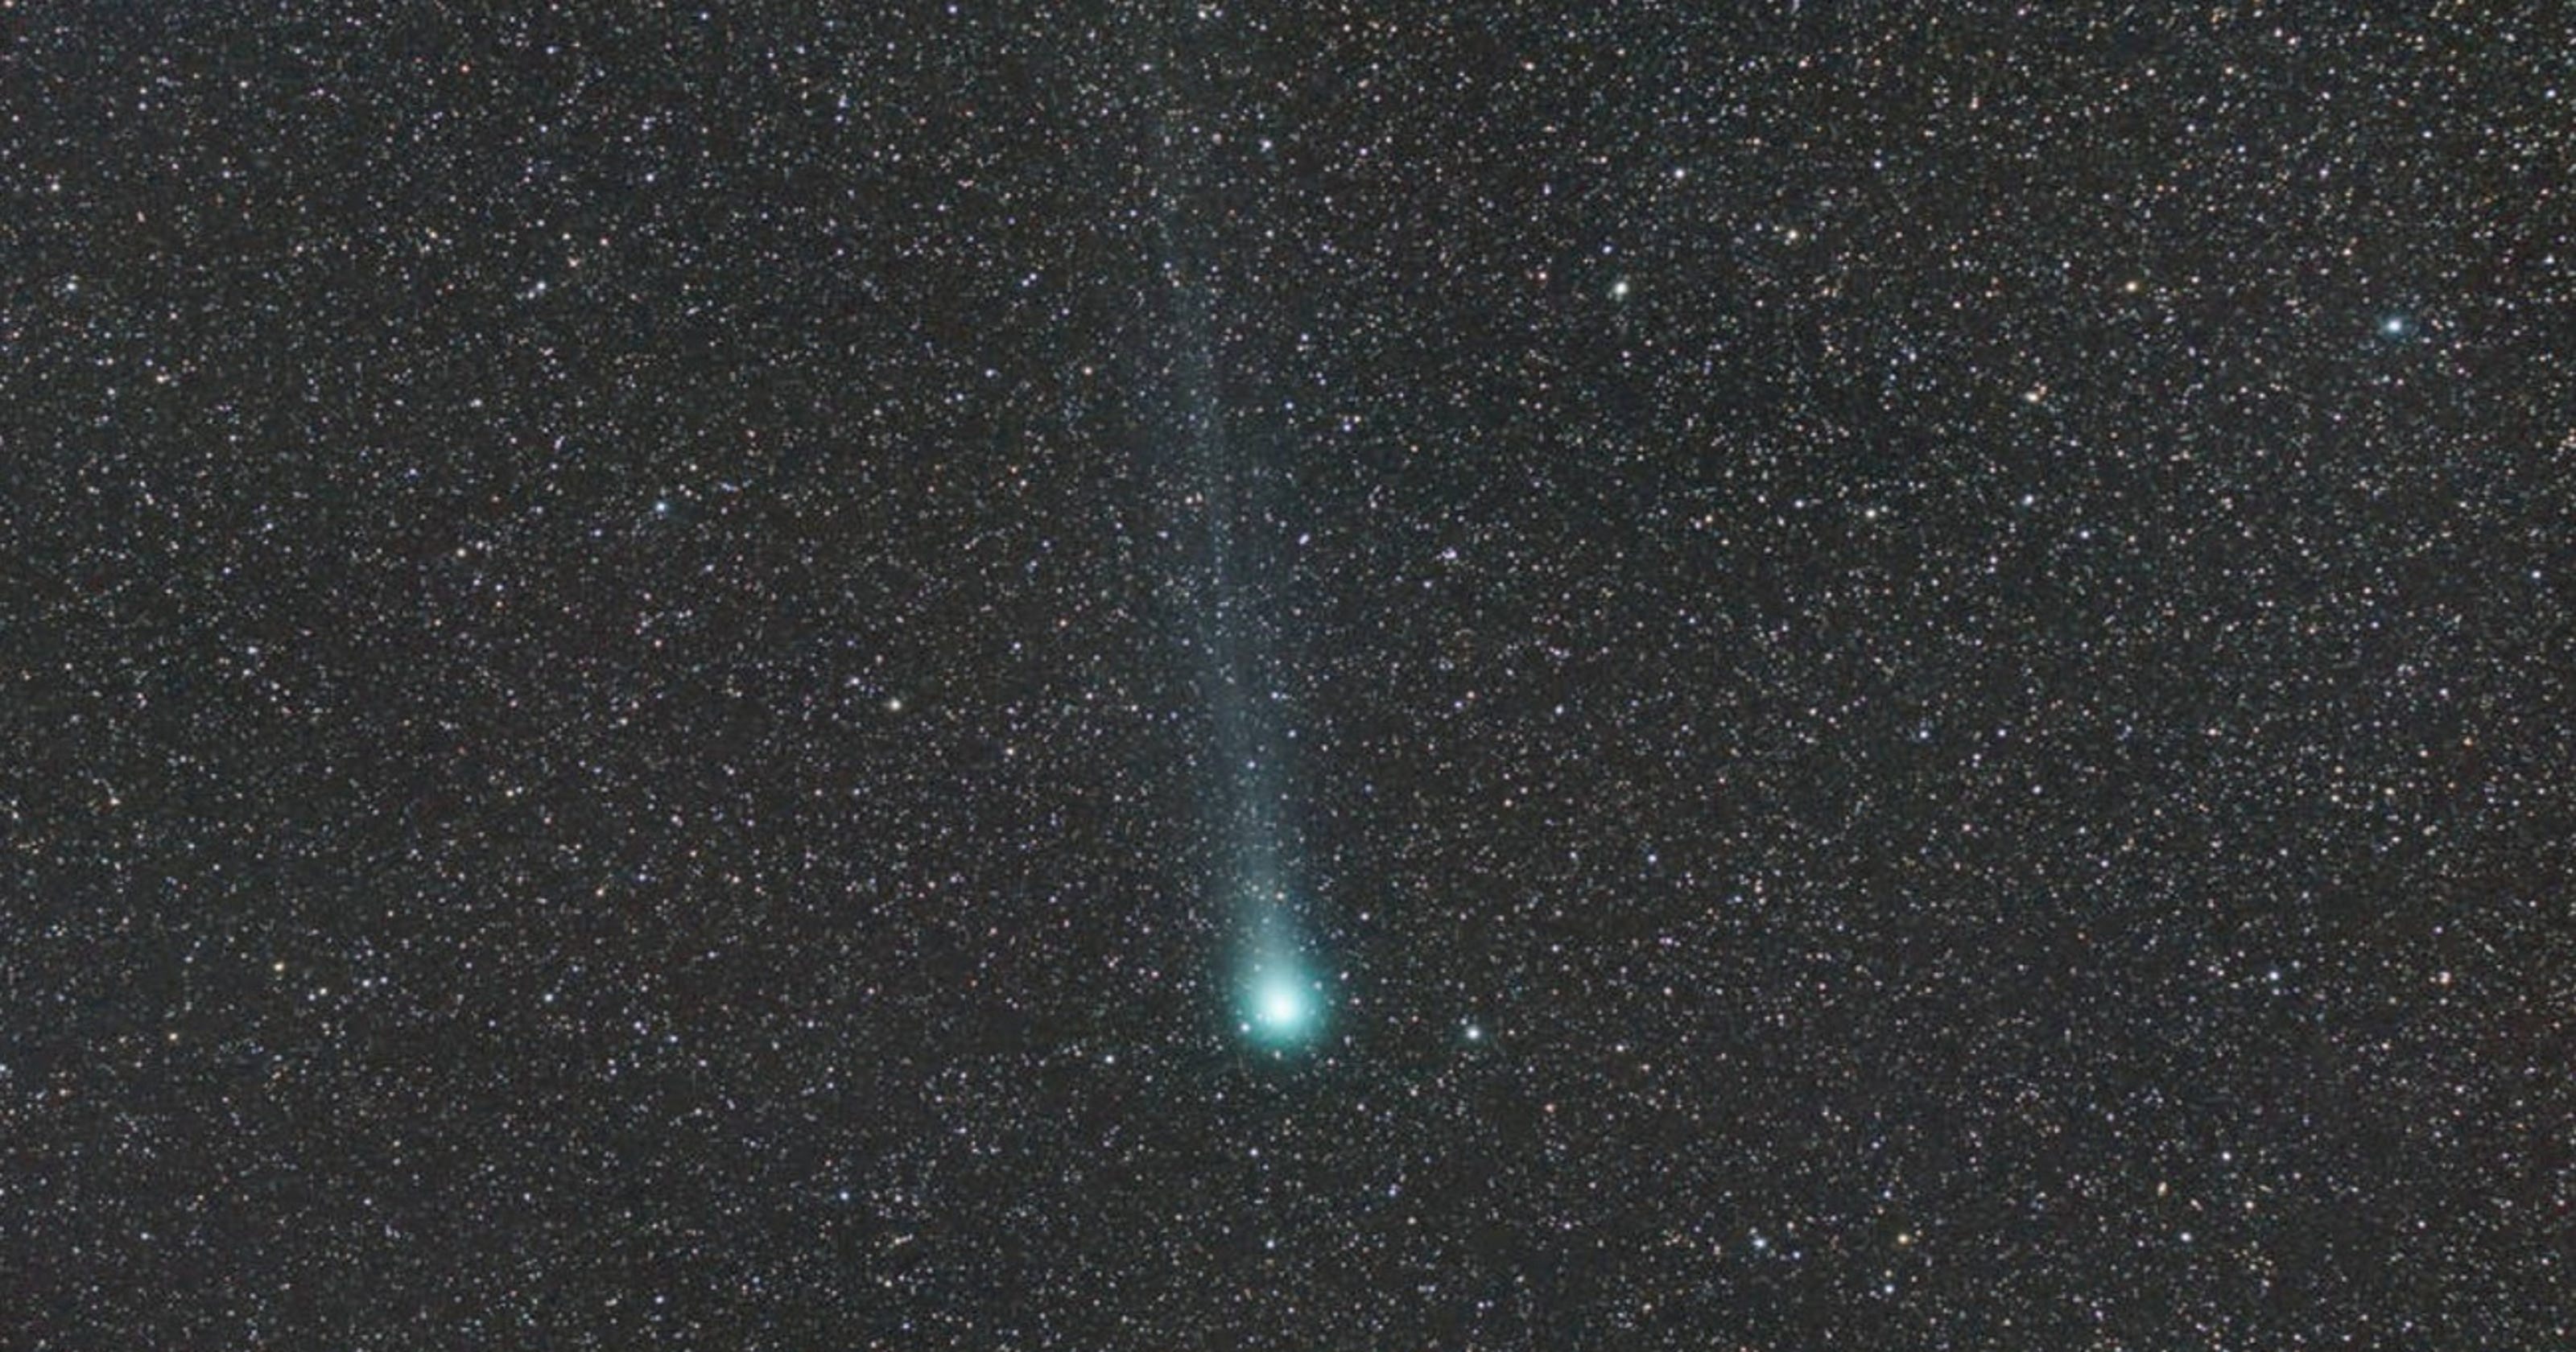 Image result for comet 46p